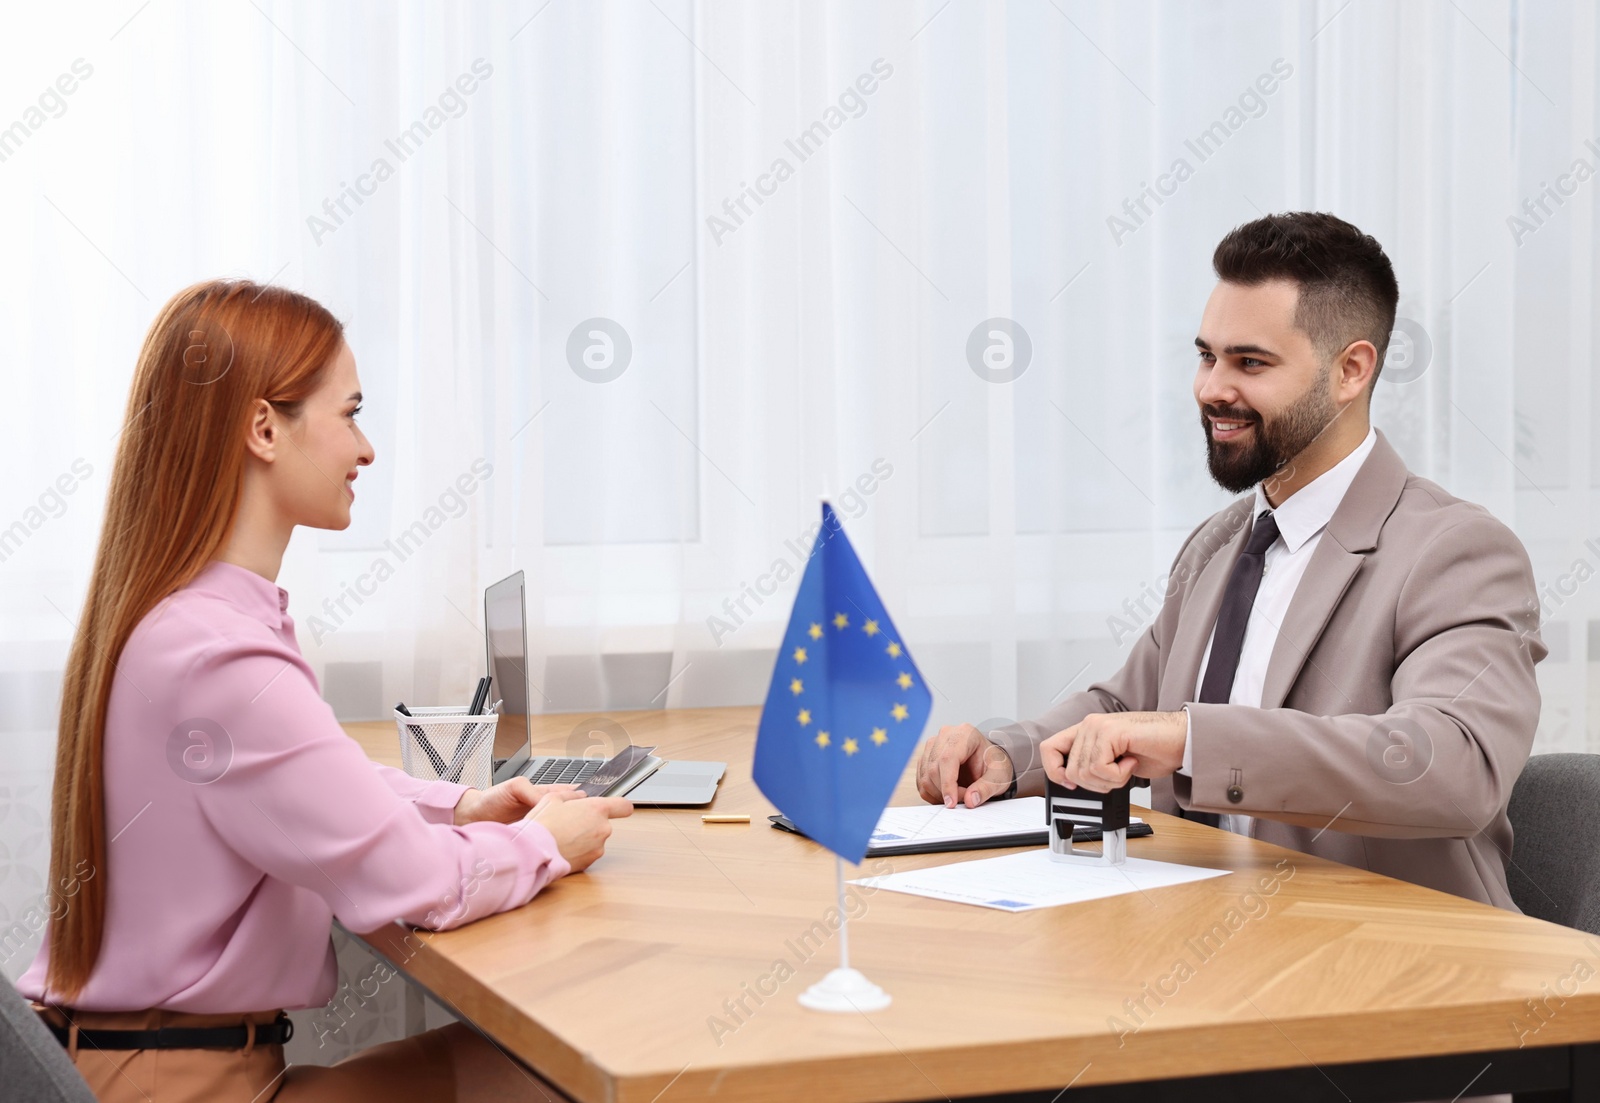 Photo of Immigration to European Union. Embassy worker approving visa application form to woman in office